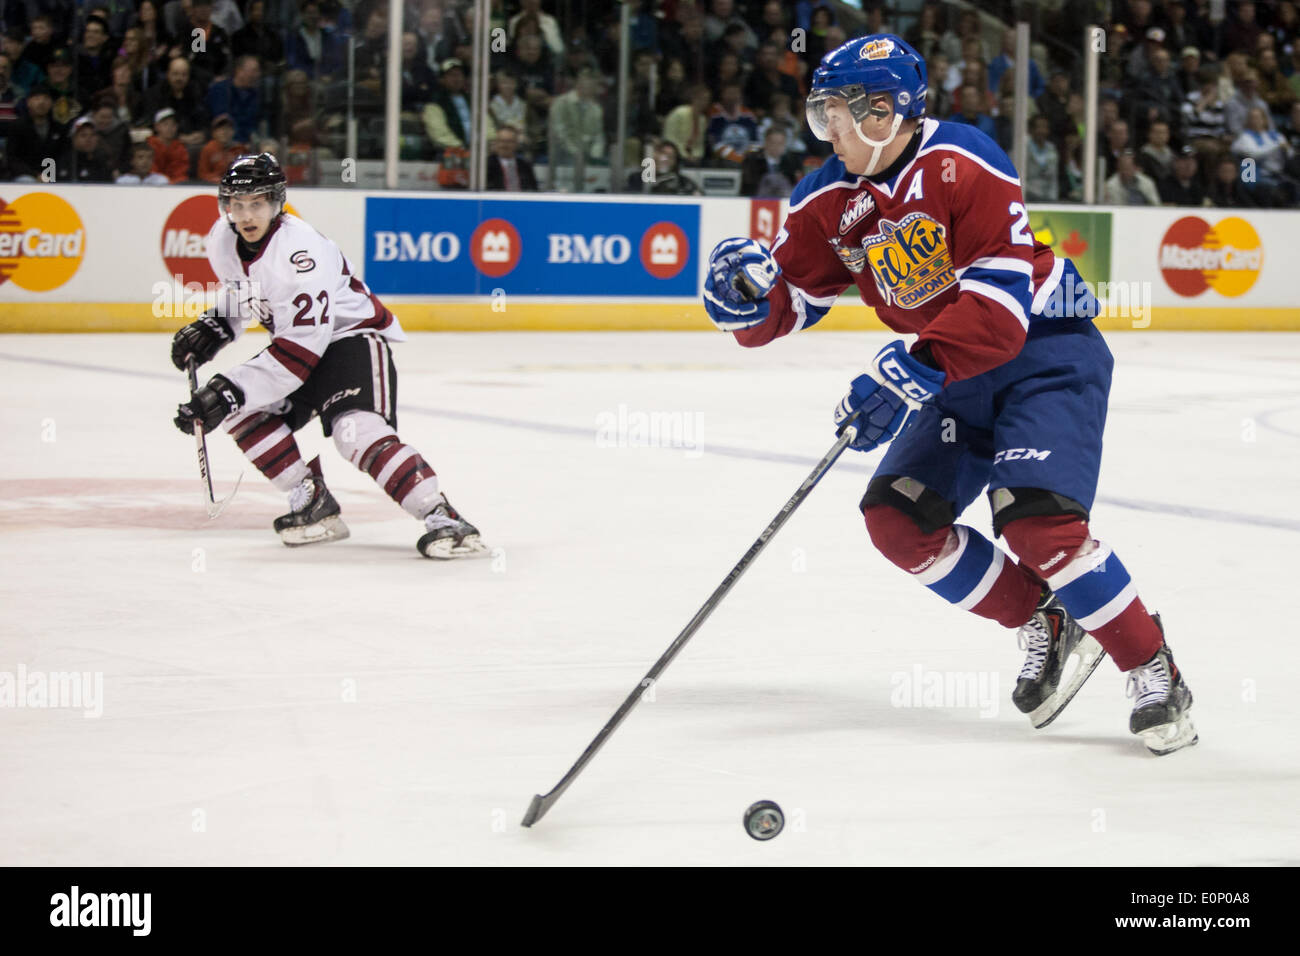 London, Ontario, Canada. 17th May, 2014. Chris Lazar (27) of the Edmonton Oil Kings carries the puck while be watched by Pius Suter of the Guelph Storm during their 2014 Memorial Cup game played at Budweiser Gardens in London Ontario, Canada on May 17, 2014.  The Guelph Storm defeated the Edmonton Oil Kings by a score of 5-2. Credit:  Mark Spowart/Alamy Live News Stock Photo